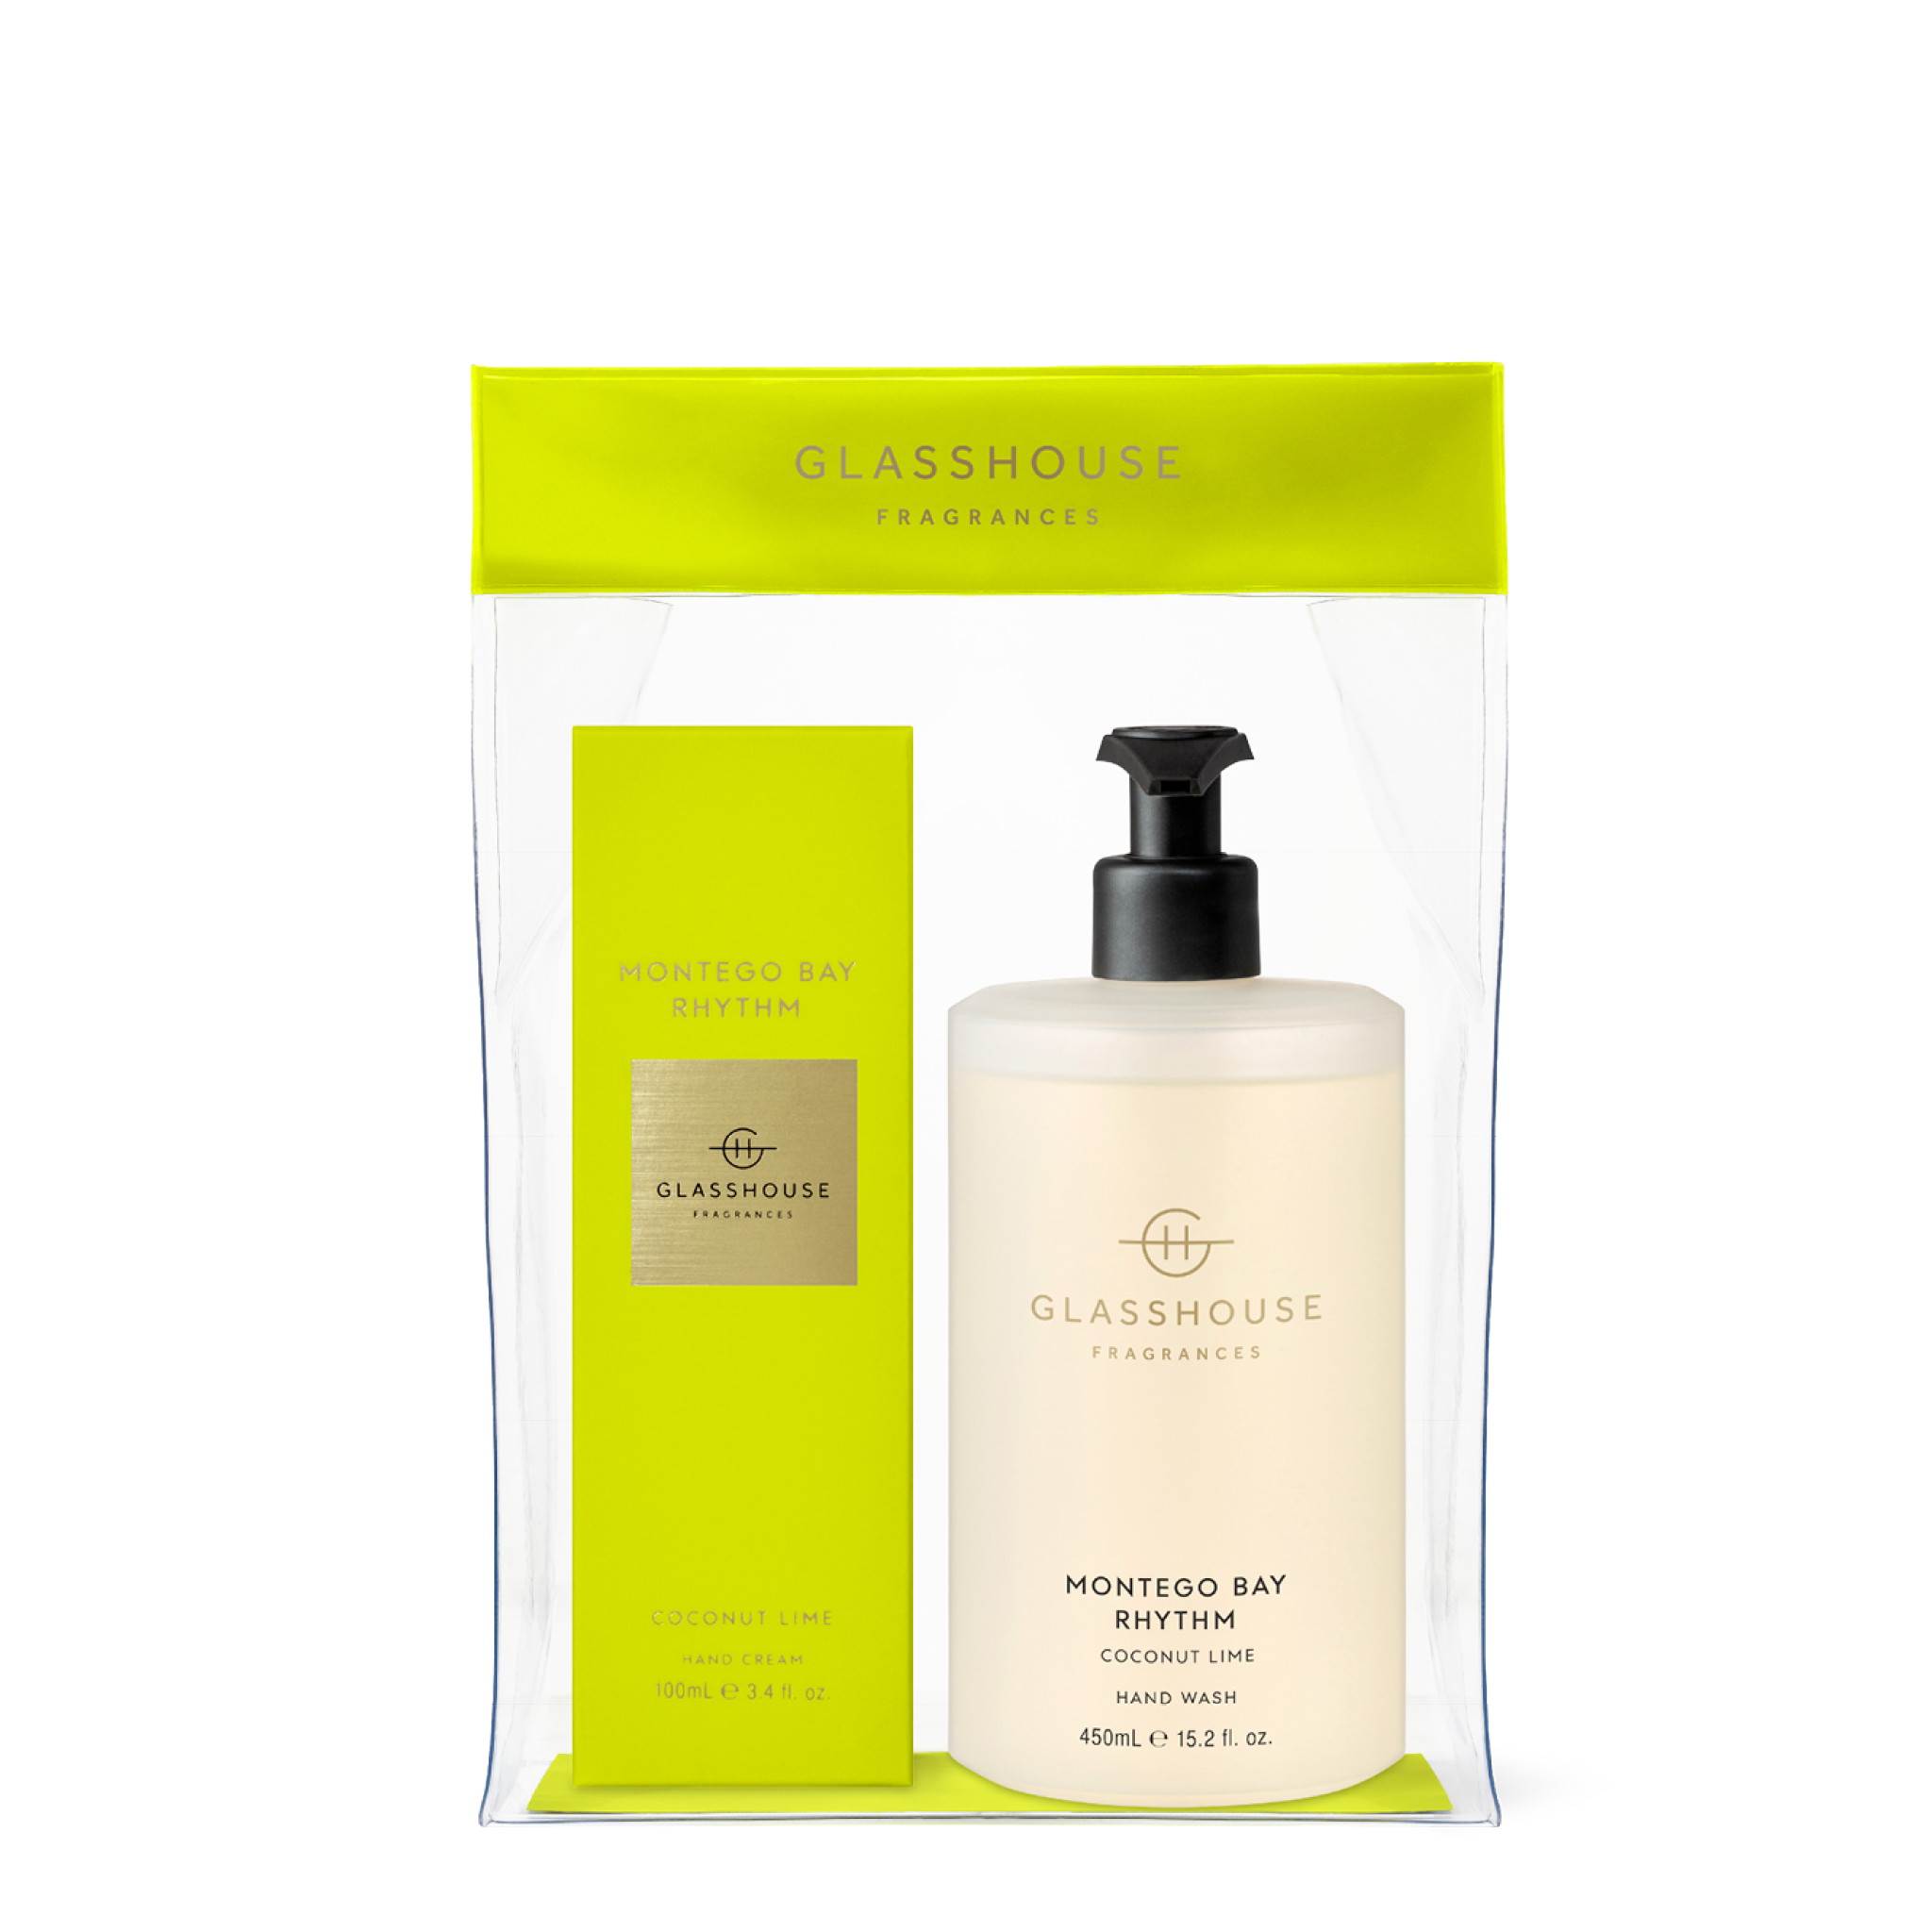 Glasshouse Fragrances Montego Bay Rhythm Coconut and Lime 100mL Hand Cream and 450mL Hand Wash flat-laid on tabletop